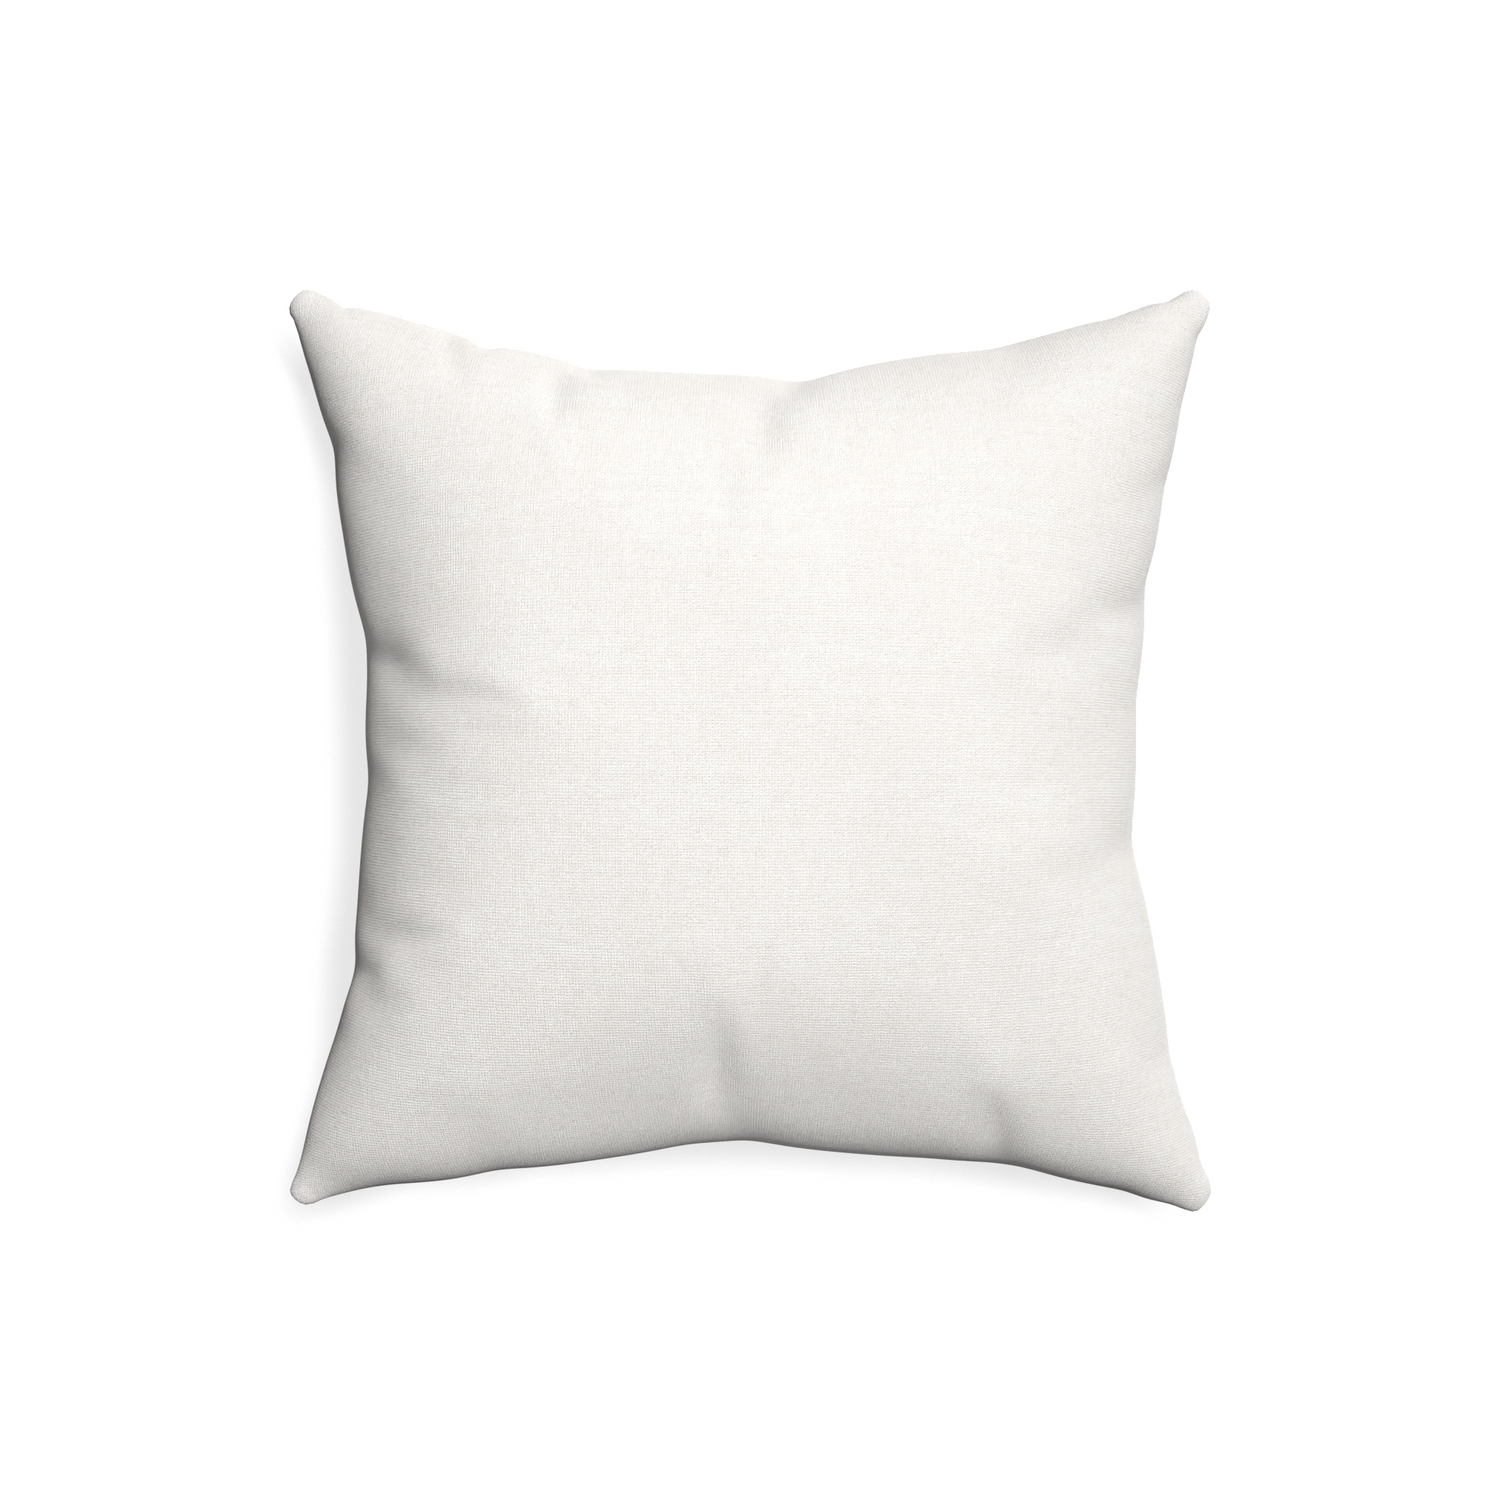 20-square flour custom pillow with none on white background